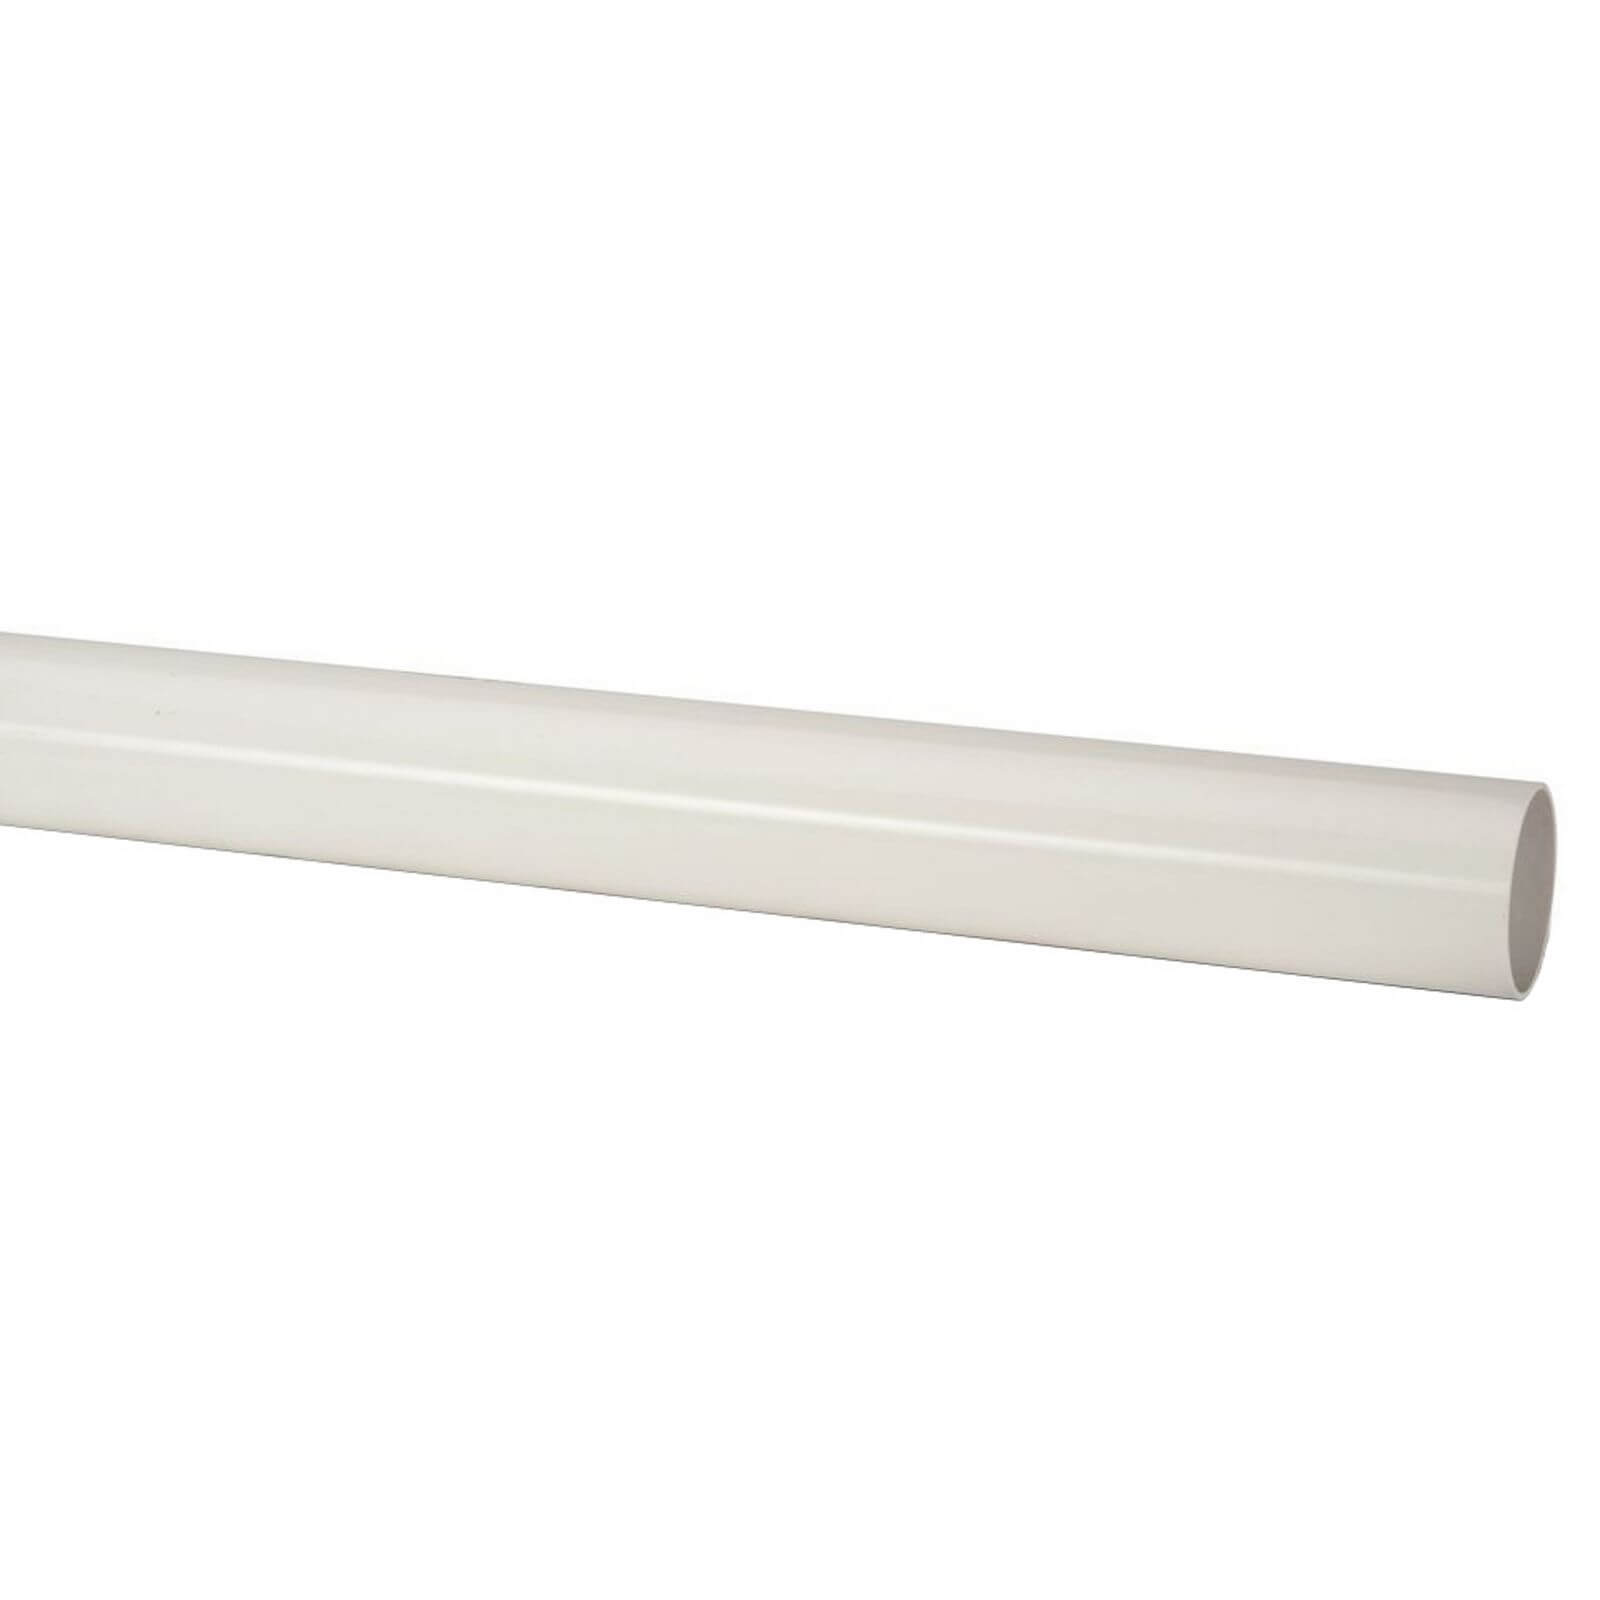 Photo of Polypipe Round Downpipe - 68mm X 2.5m - White